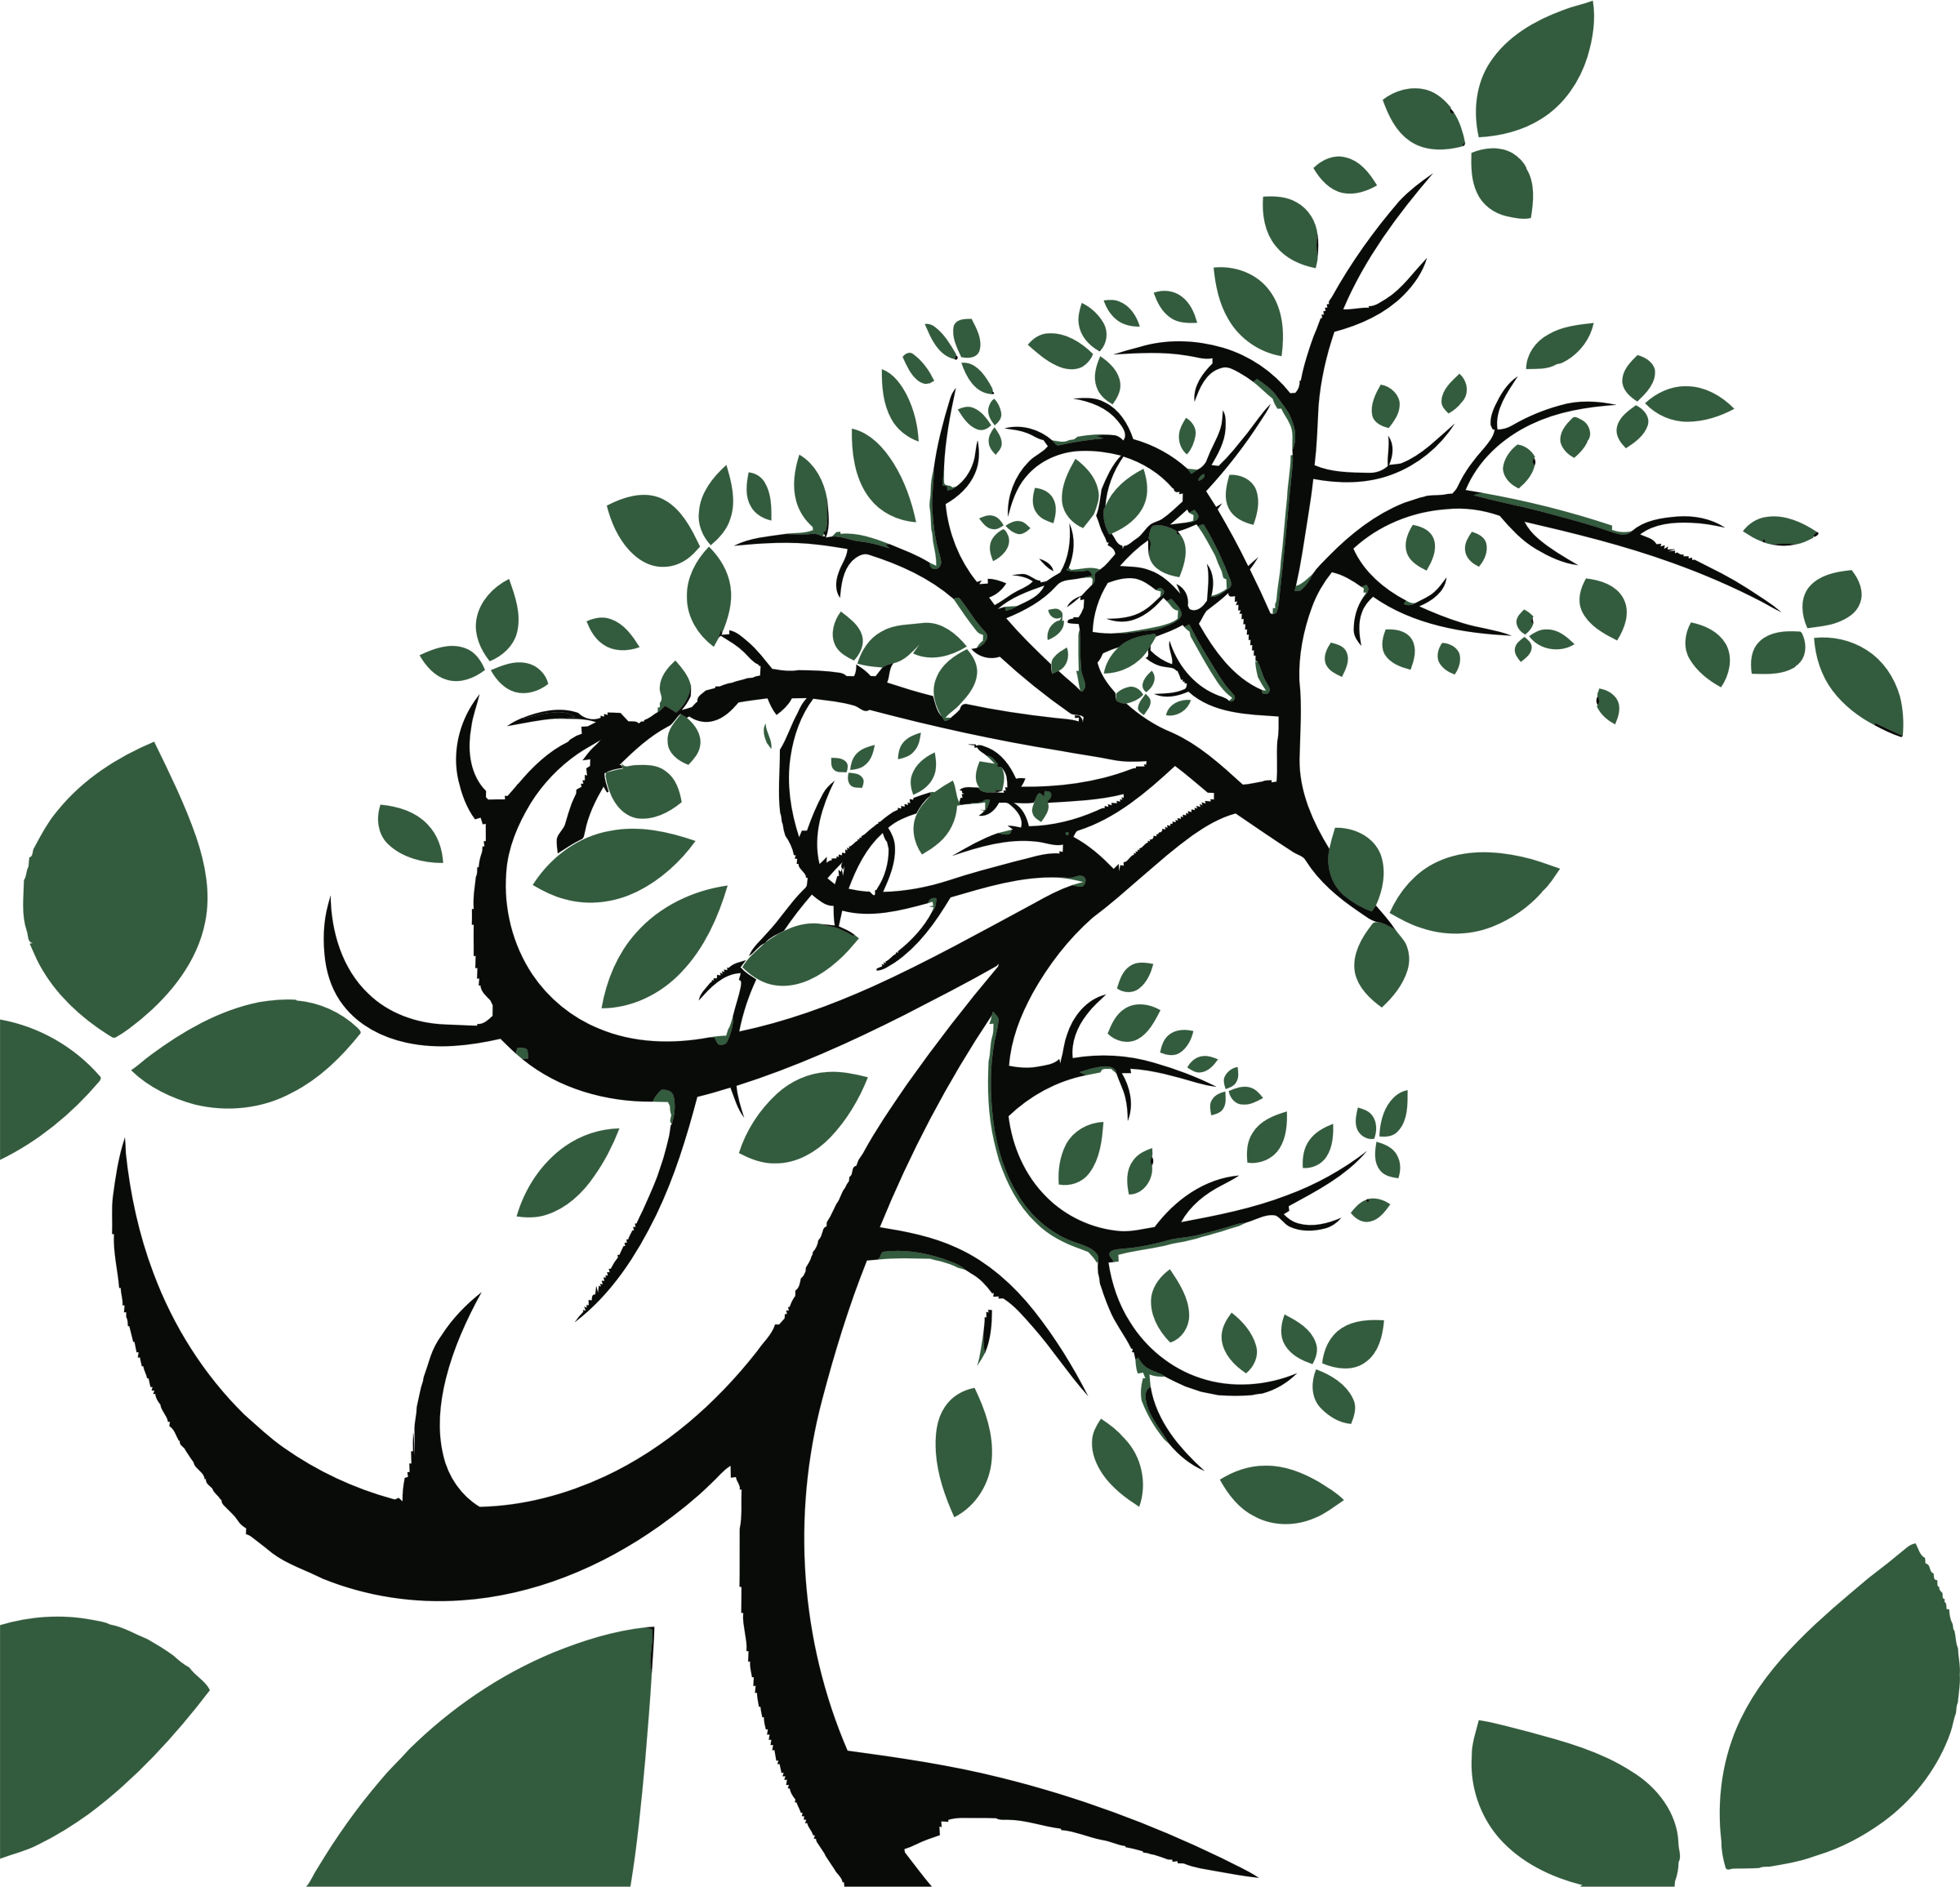 Abstract Tree Design PNG image